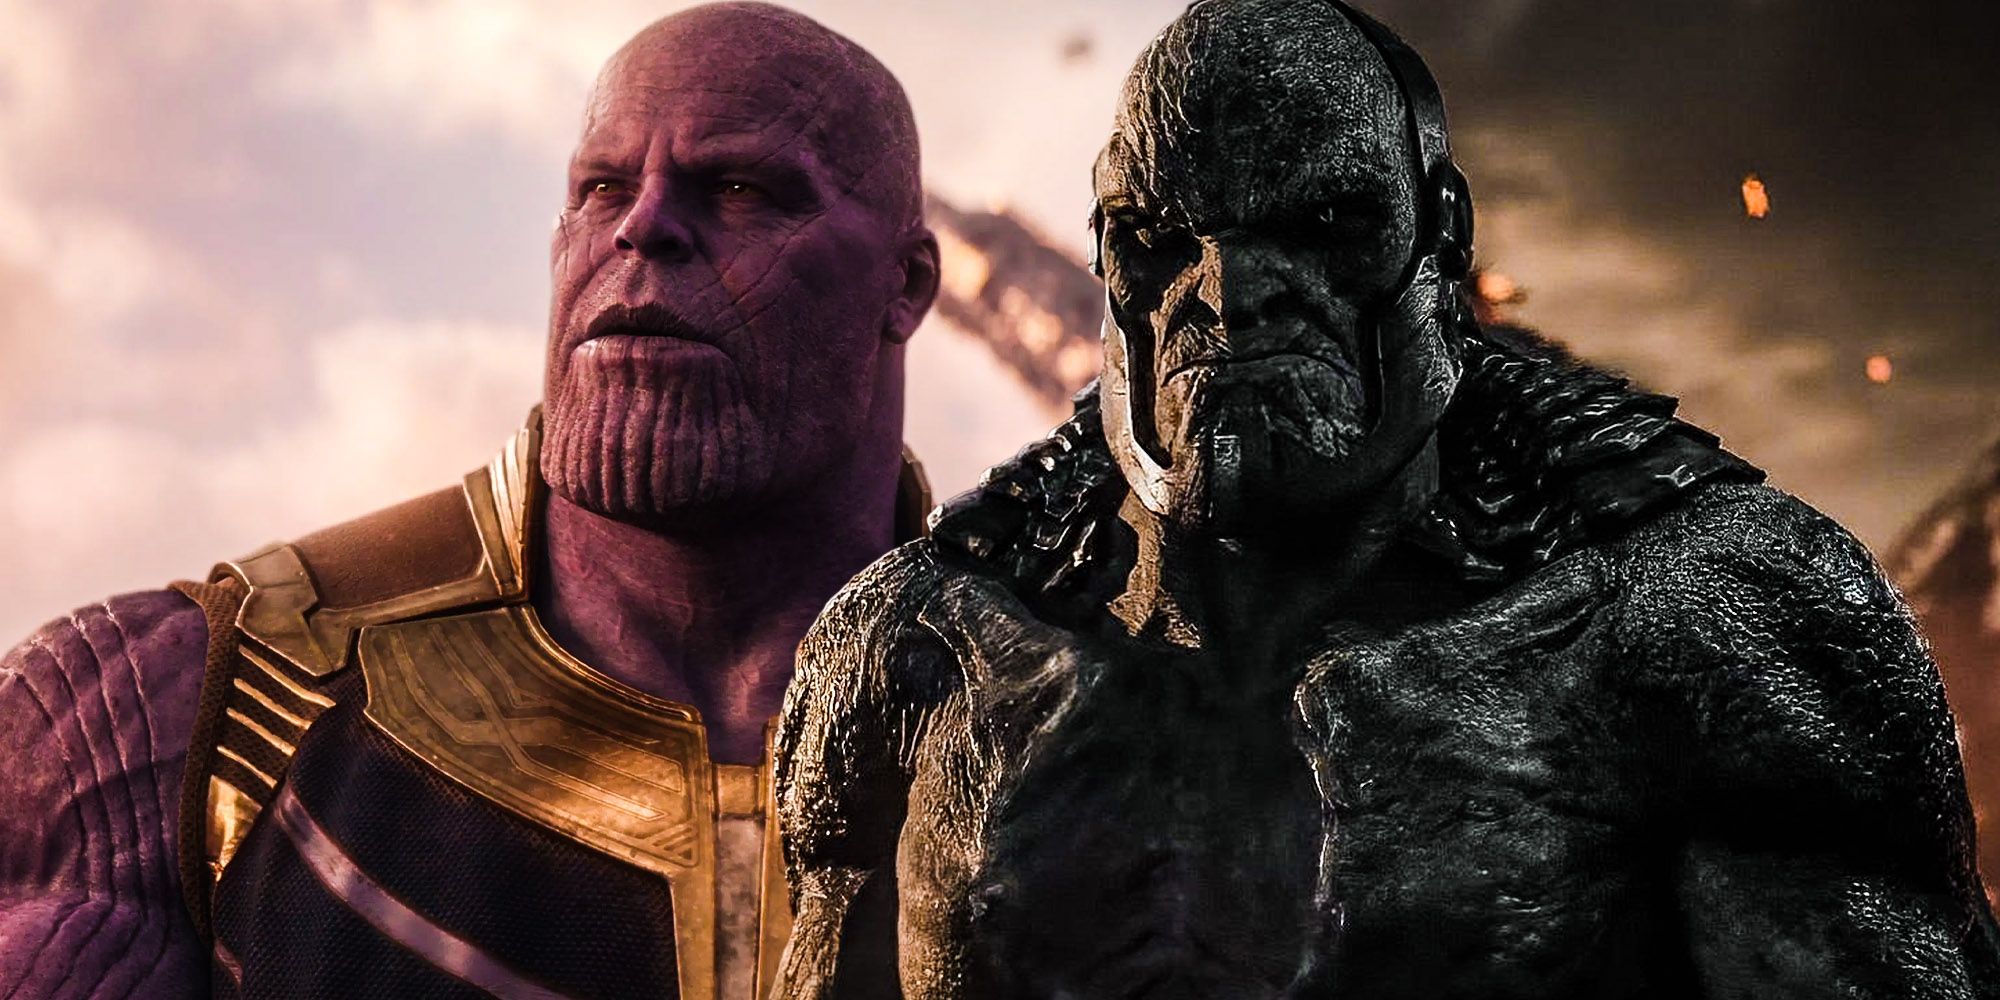 Darkseid vs Thanos How The Justice League & Avengers Villains Are Different